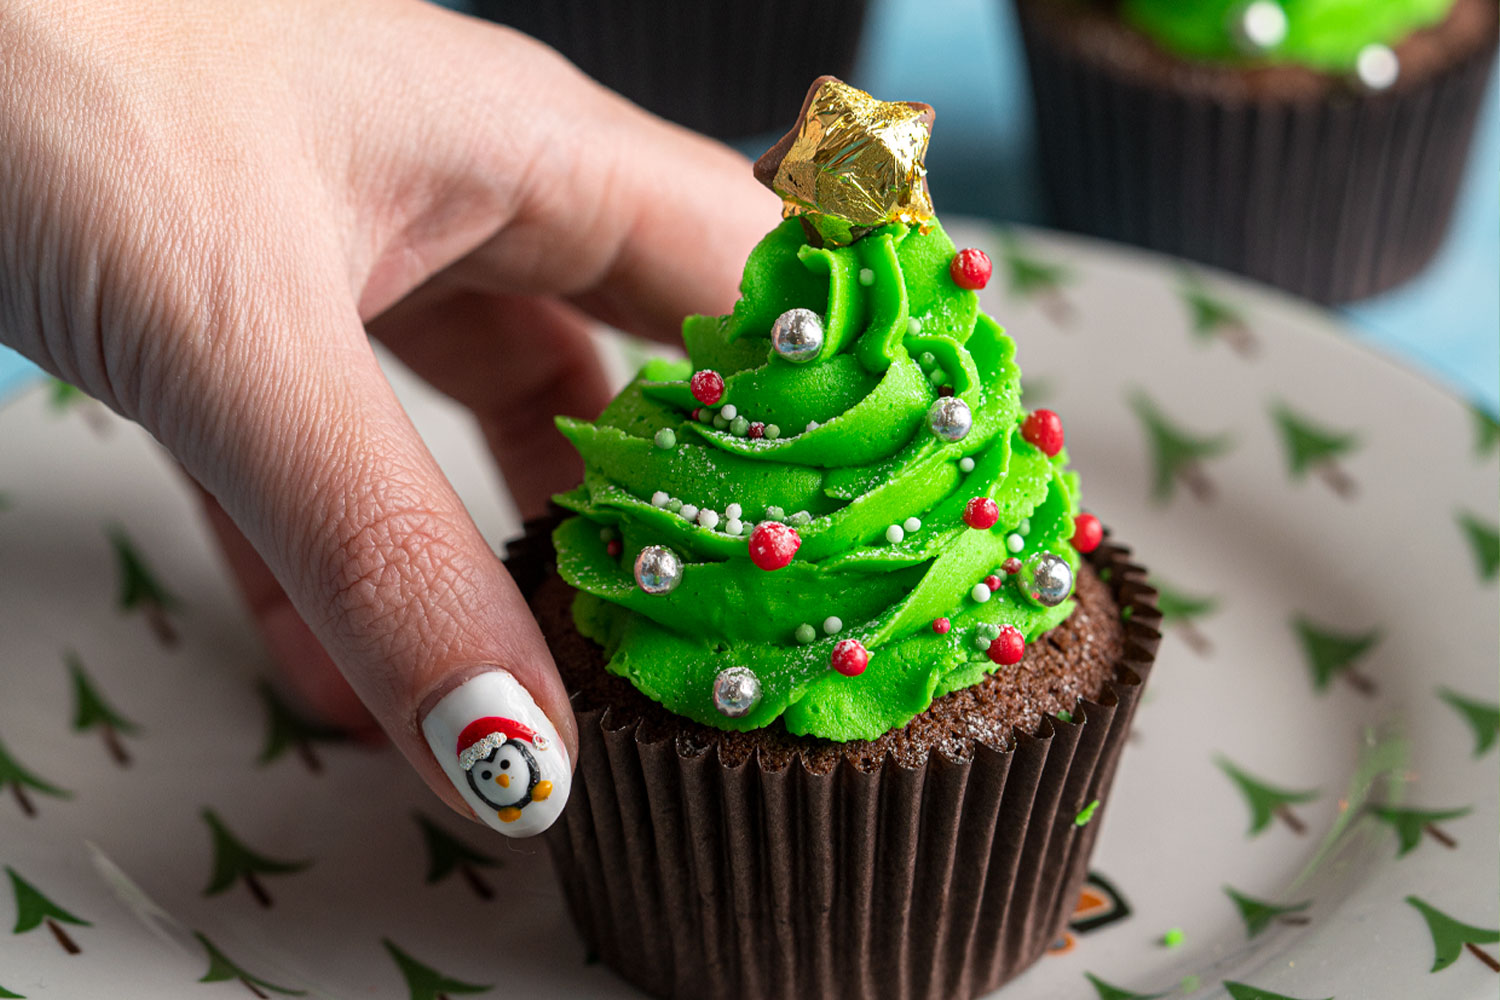 How to Make a Christmas Tree Cake Out of Cupcakes